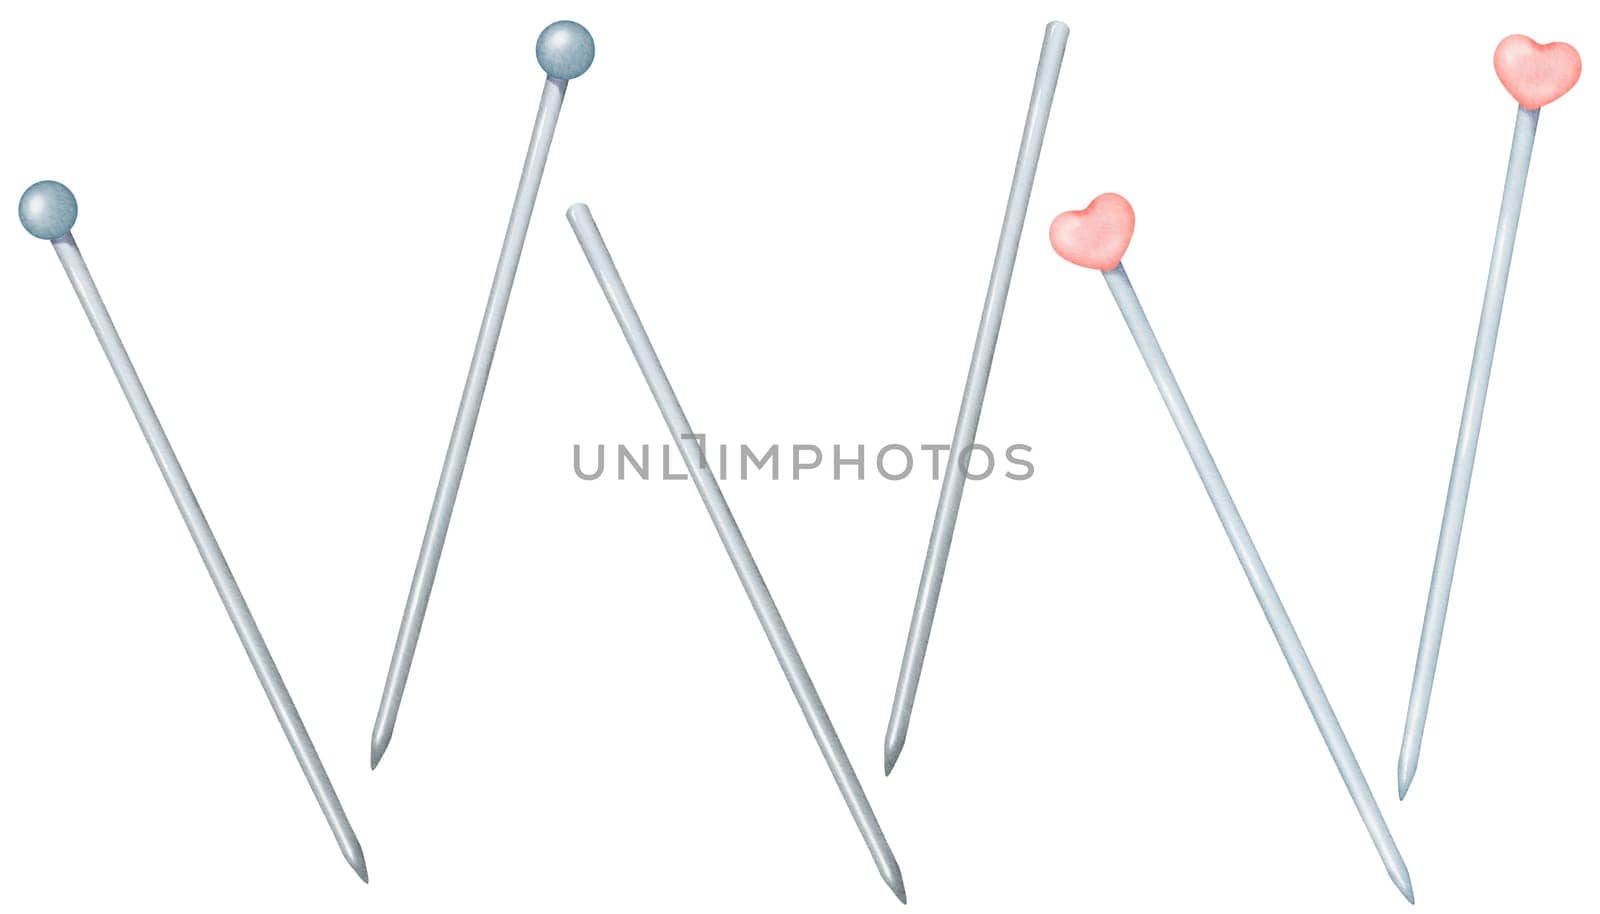 set of assorted metal knitting needles adorned with charming plastic heart-shaped charms, watercolor illustration. for crafting books, decorative for knitting tutorials, and crafting-themed projects.